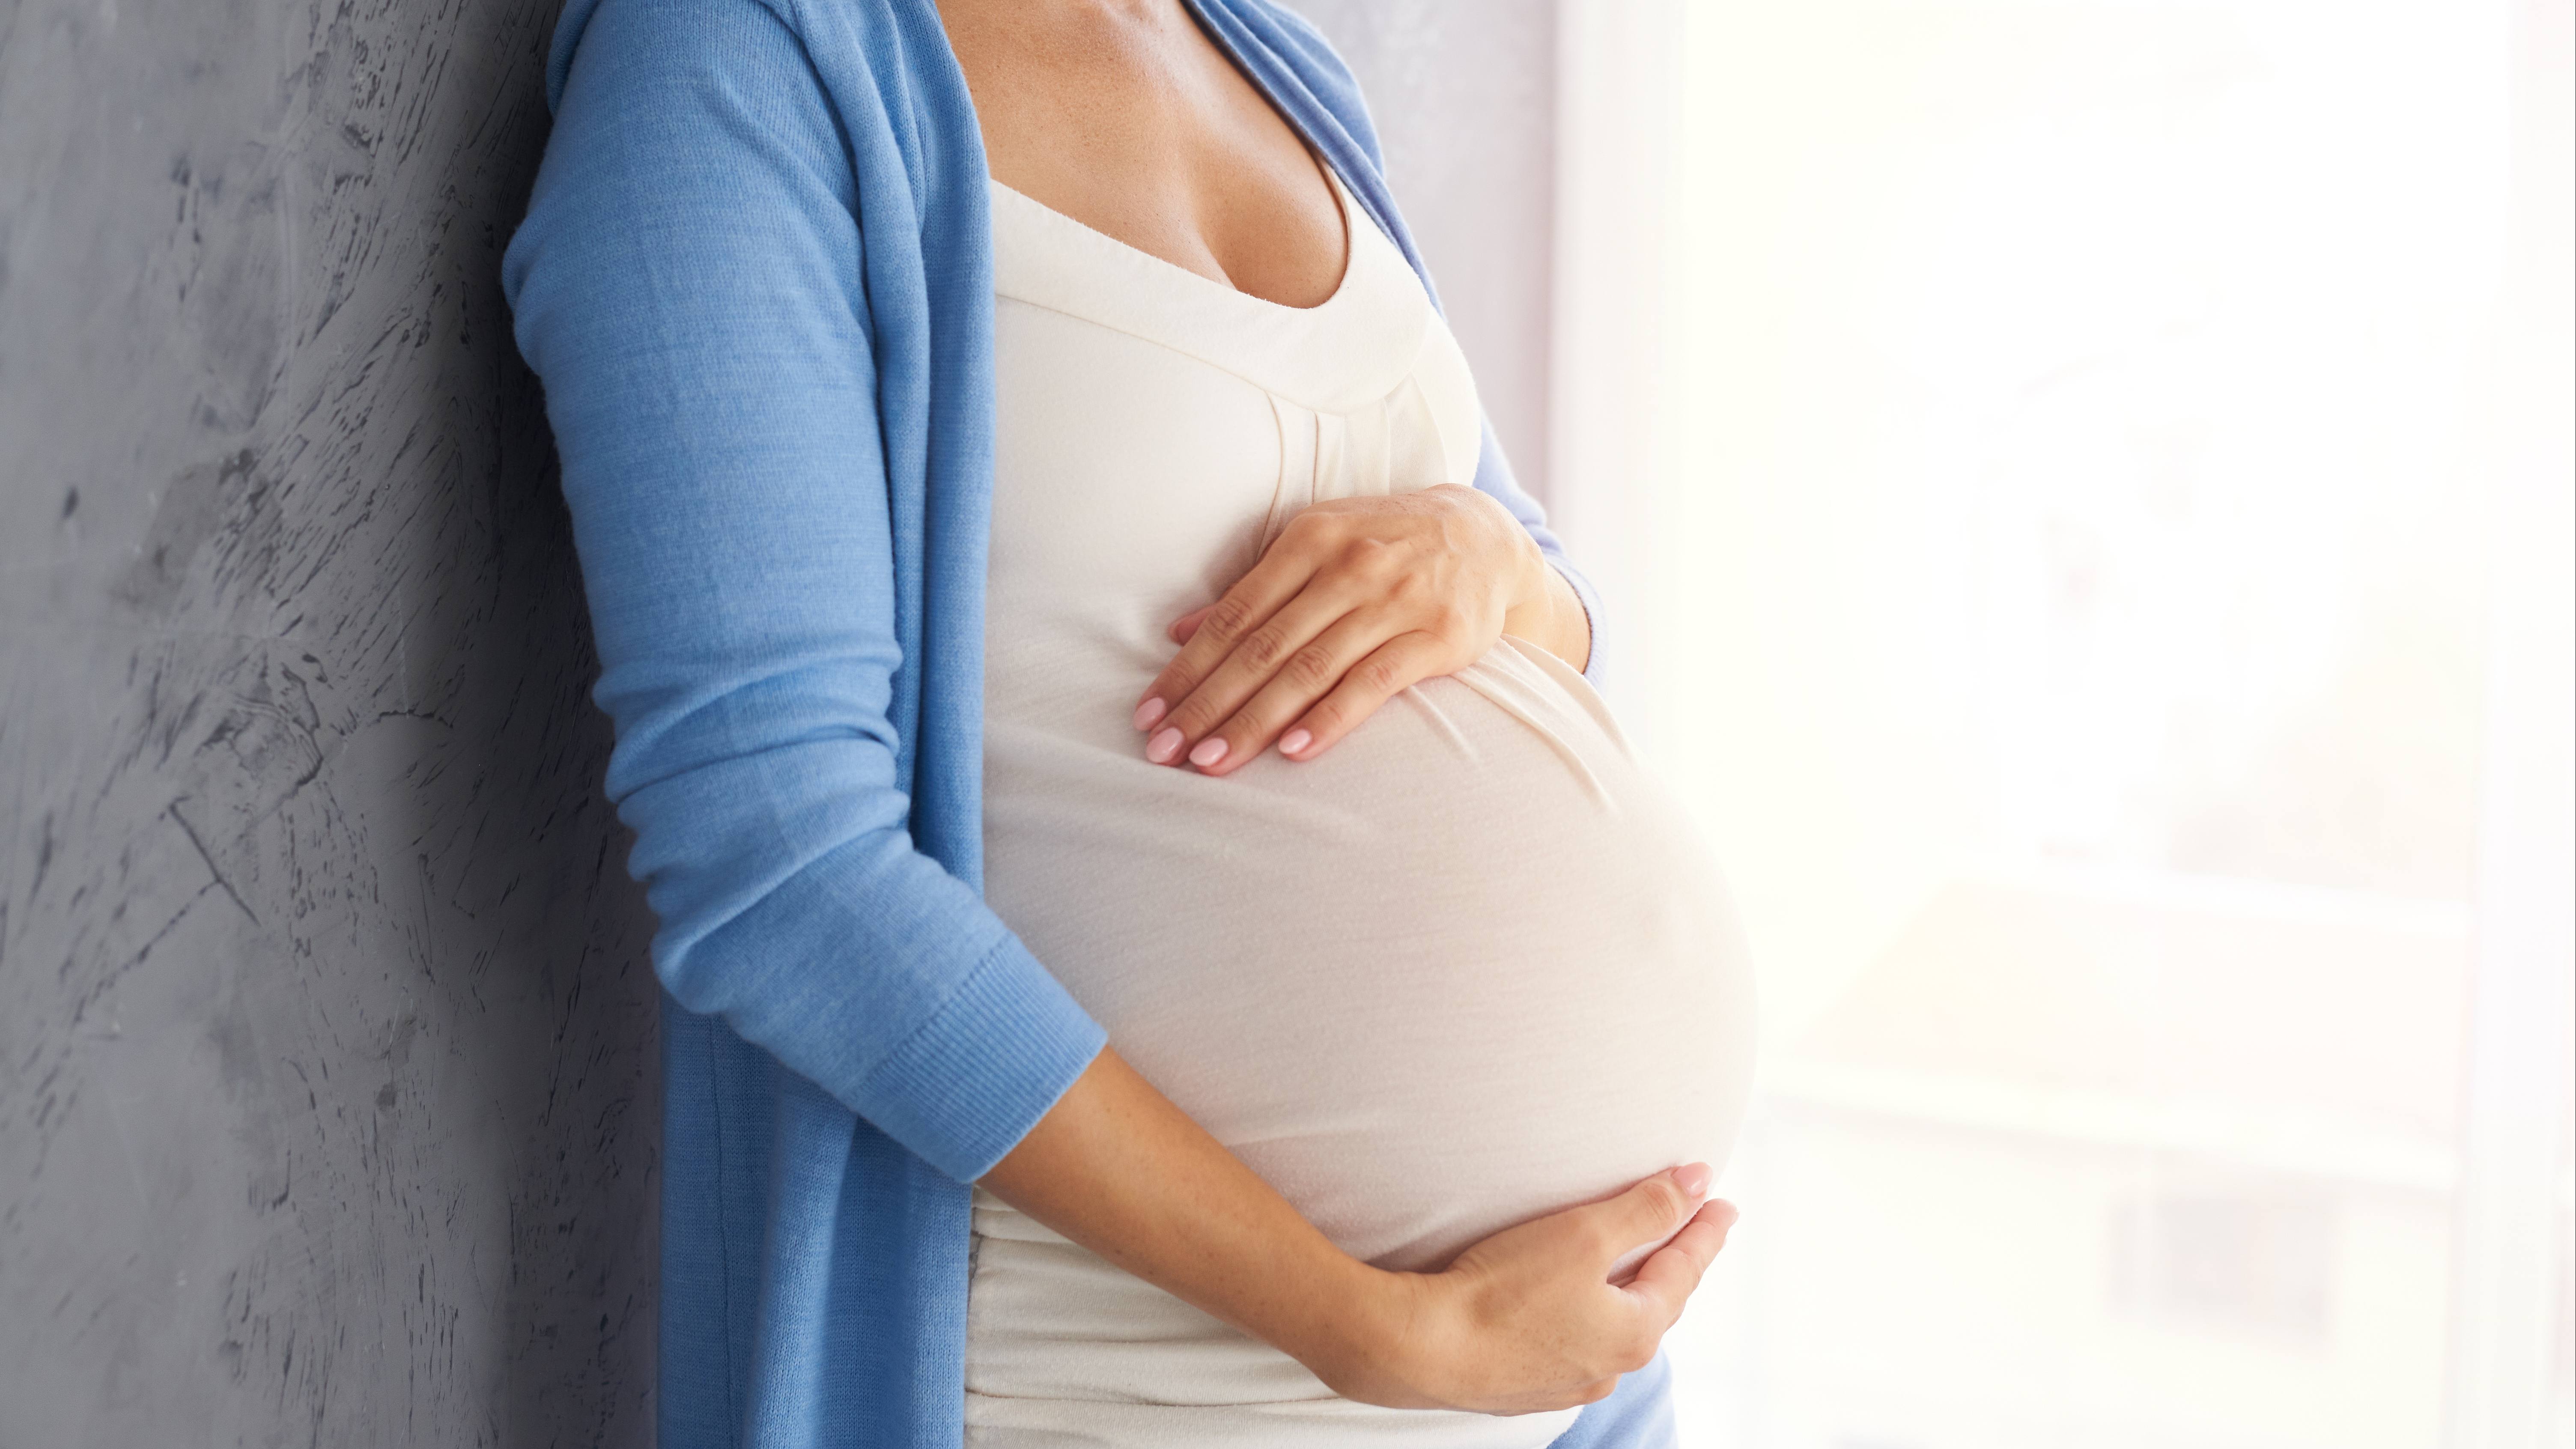 Women's Wellness: Pregnancy and COVID-19 - Mayo Clinic News Network